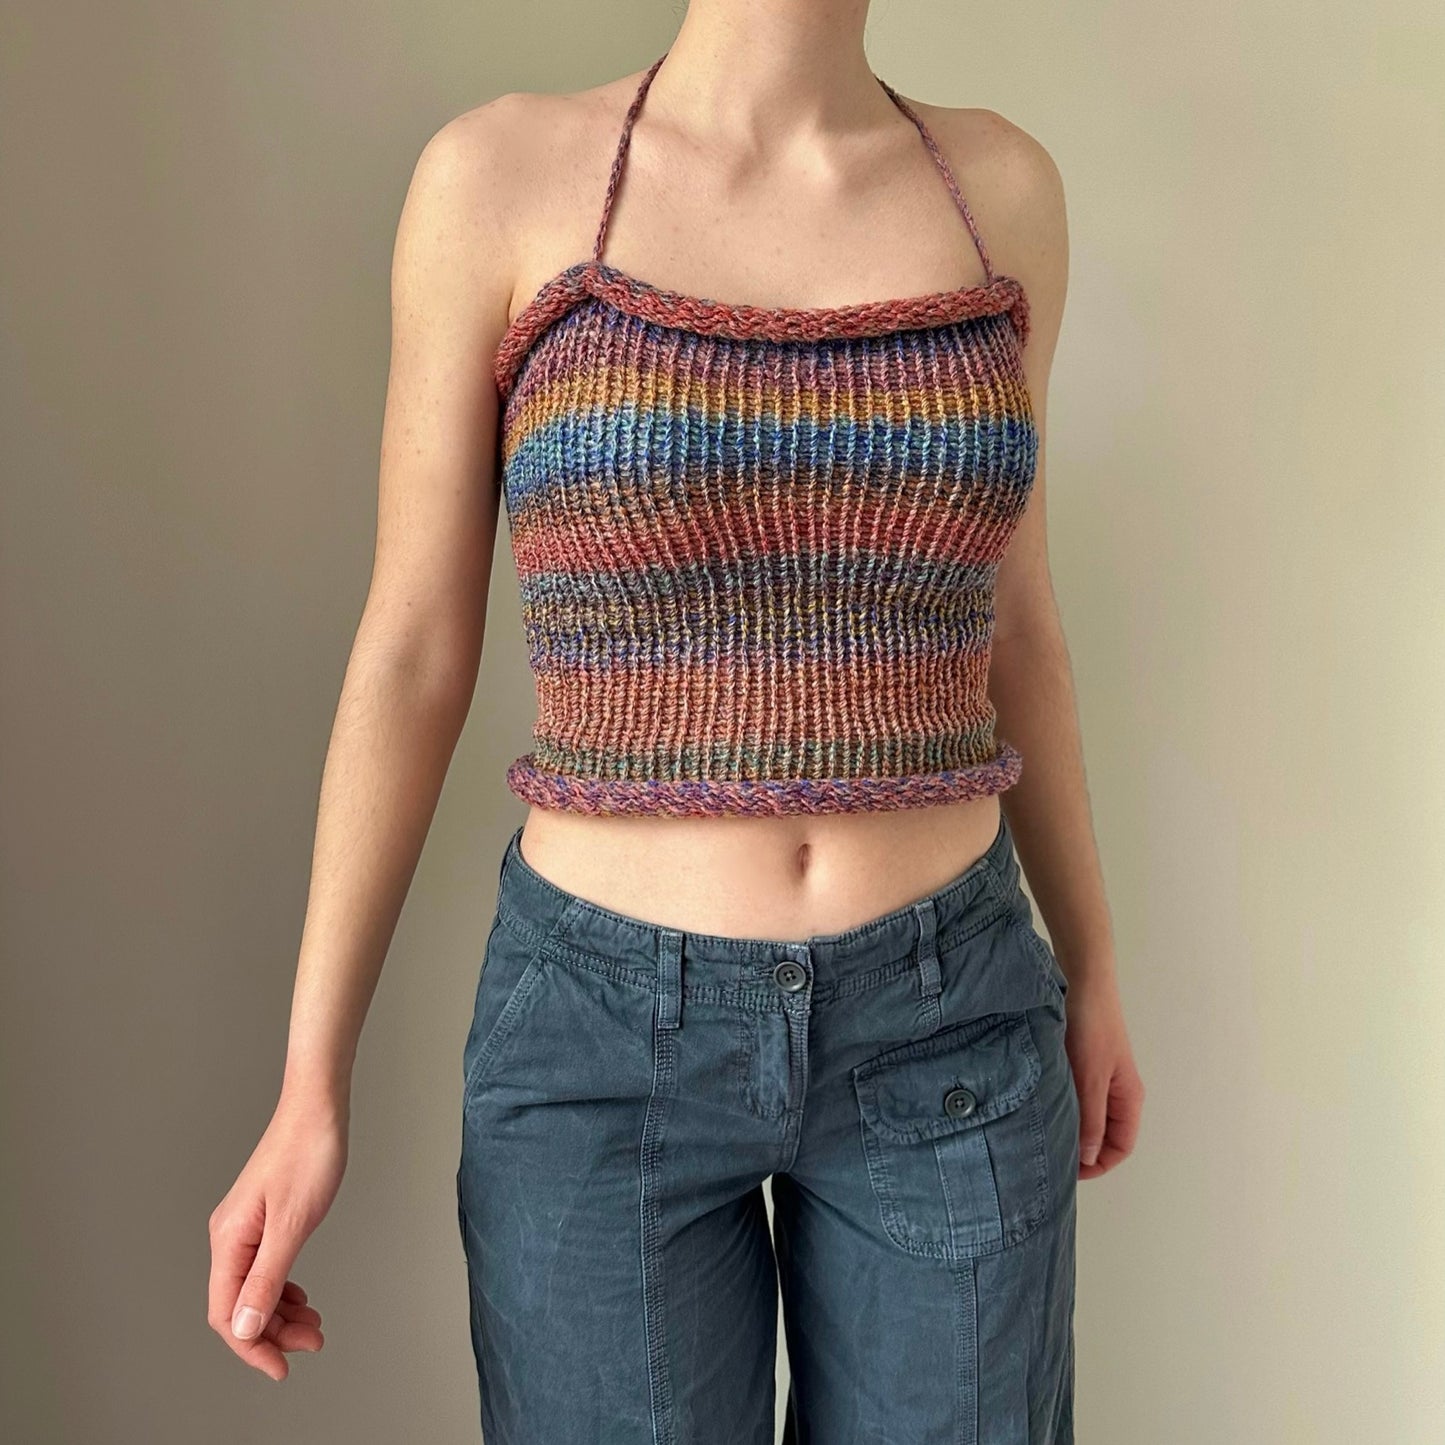 Handmade knitted halter top in orange, red, blue and purple